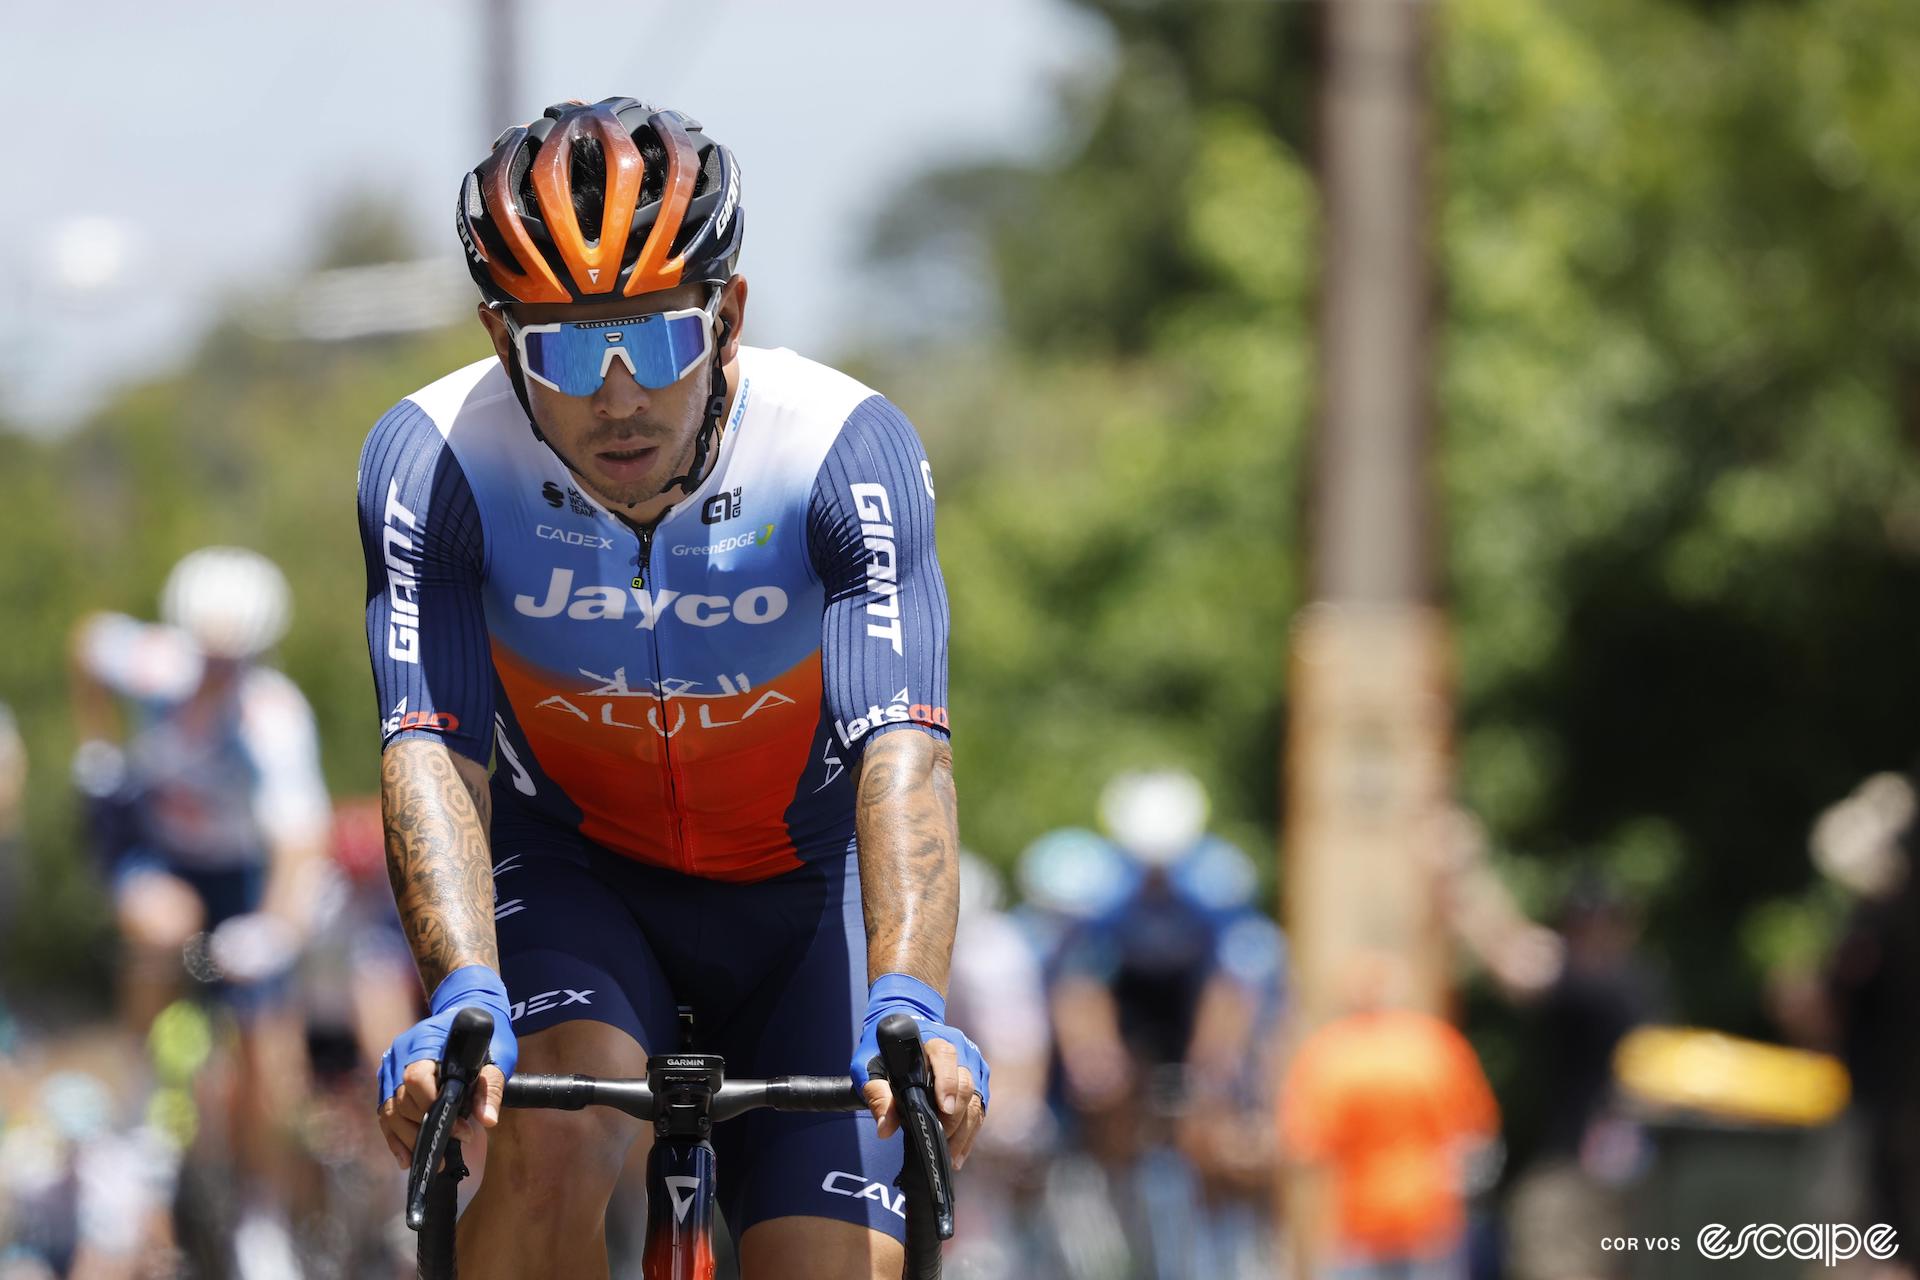 A dejected-looking Caleb Ewan rides ahead of a group of riders.